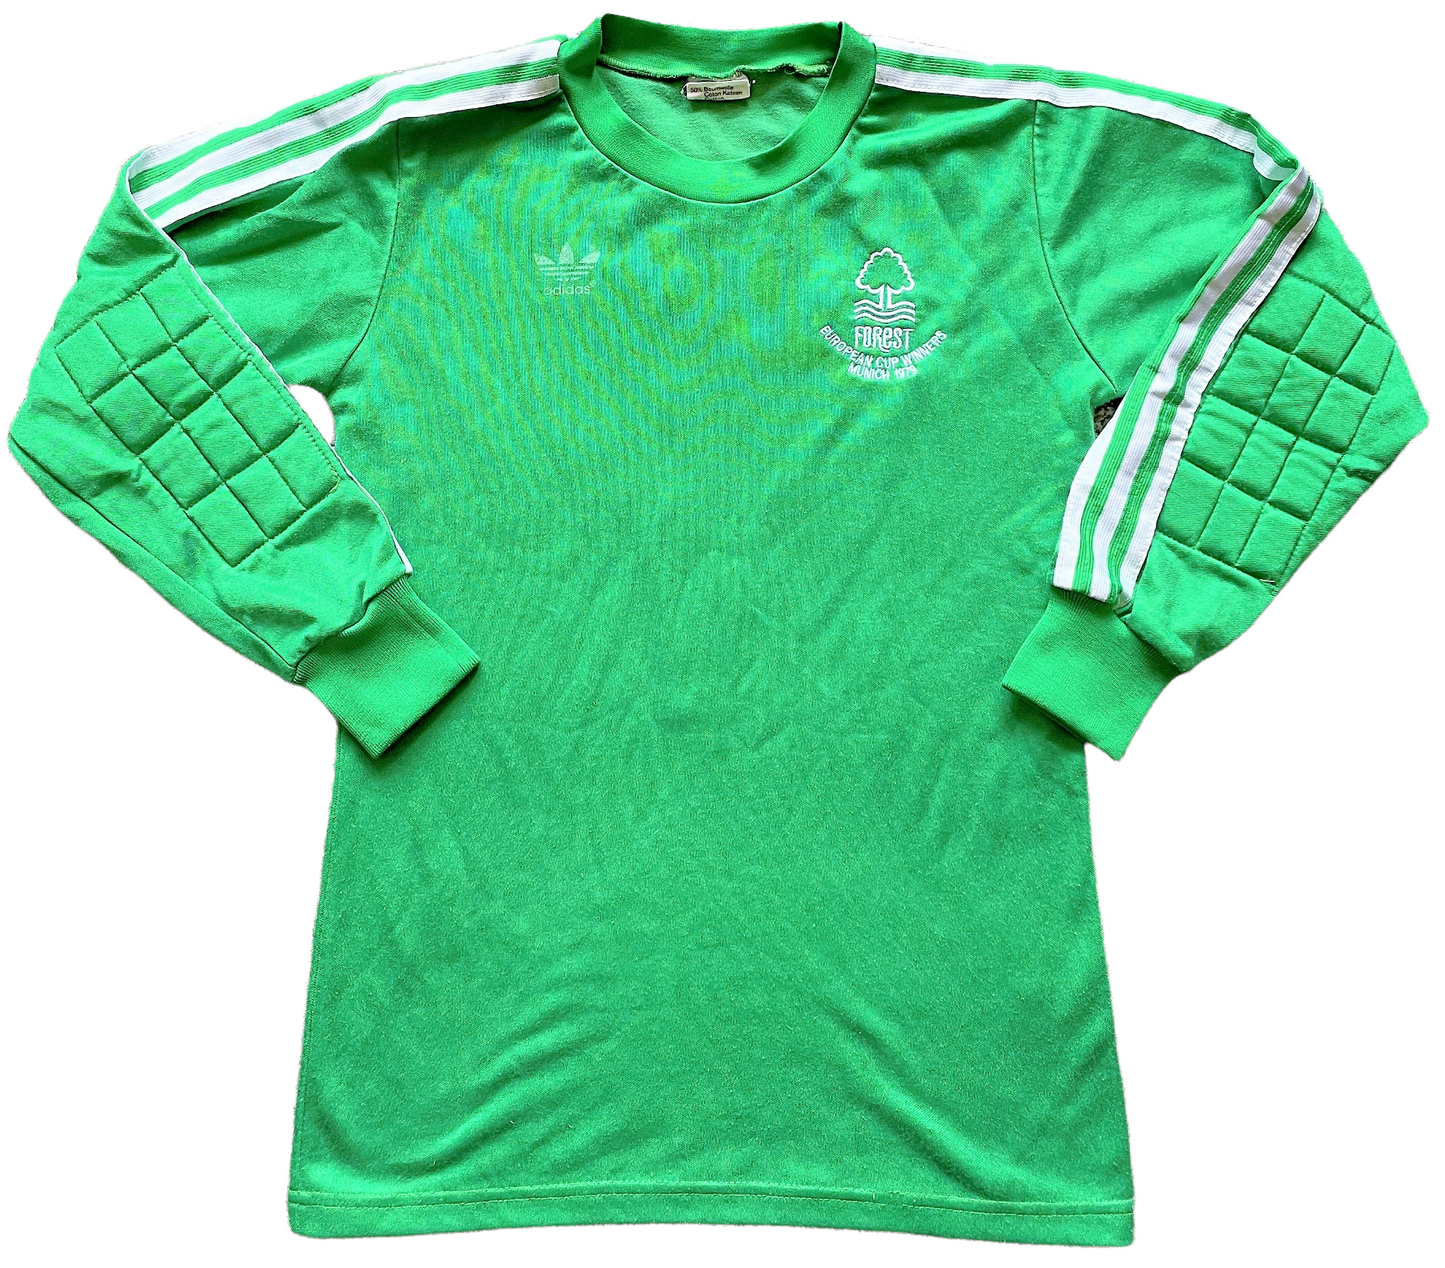 1979 Nottingham Forest GK shirt (very good) Adults Small.